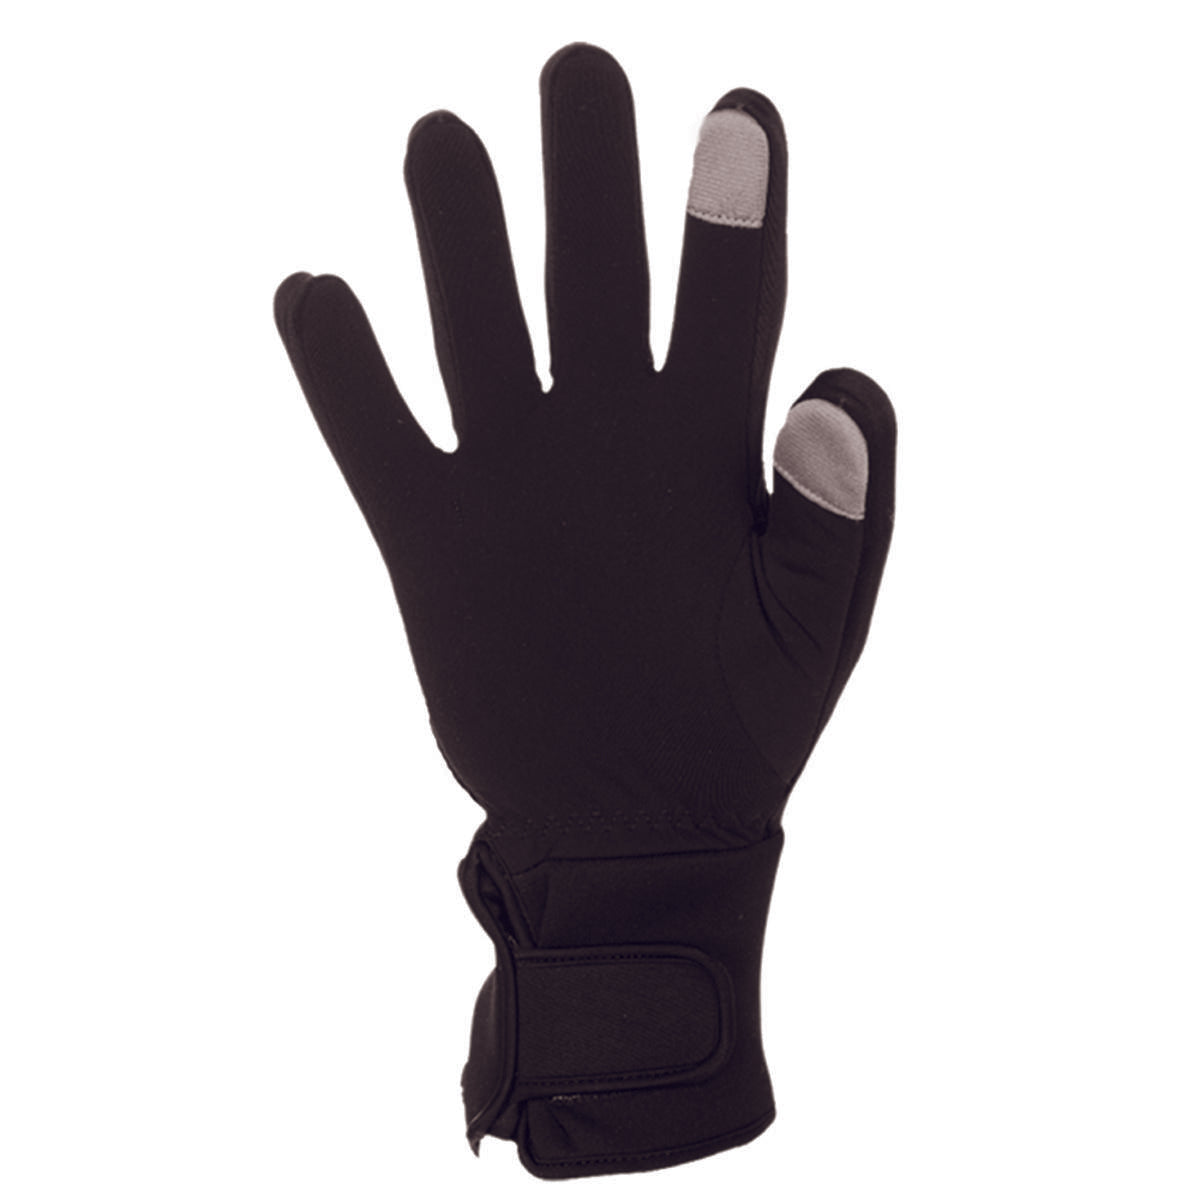 Mobile Warming - Unisex 12v Heated Glove Liner (plugs into bike OR lithium battery)